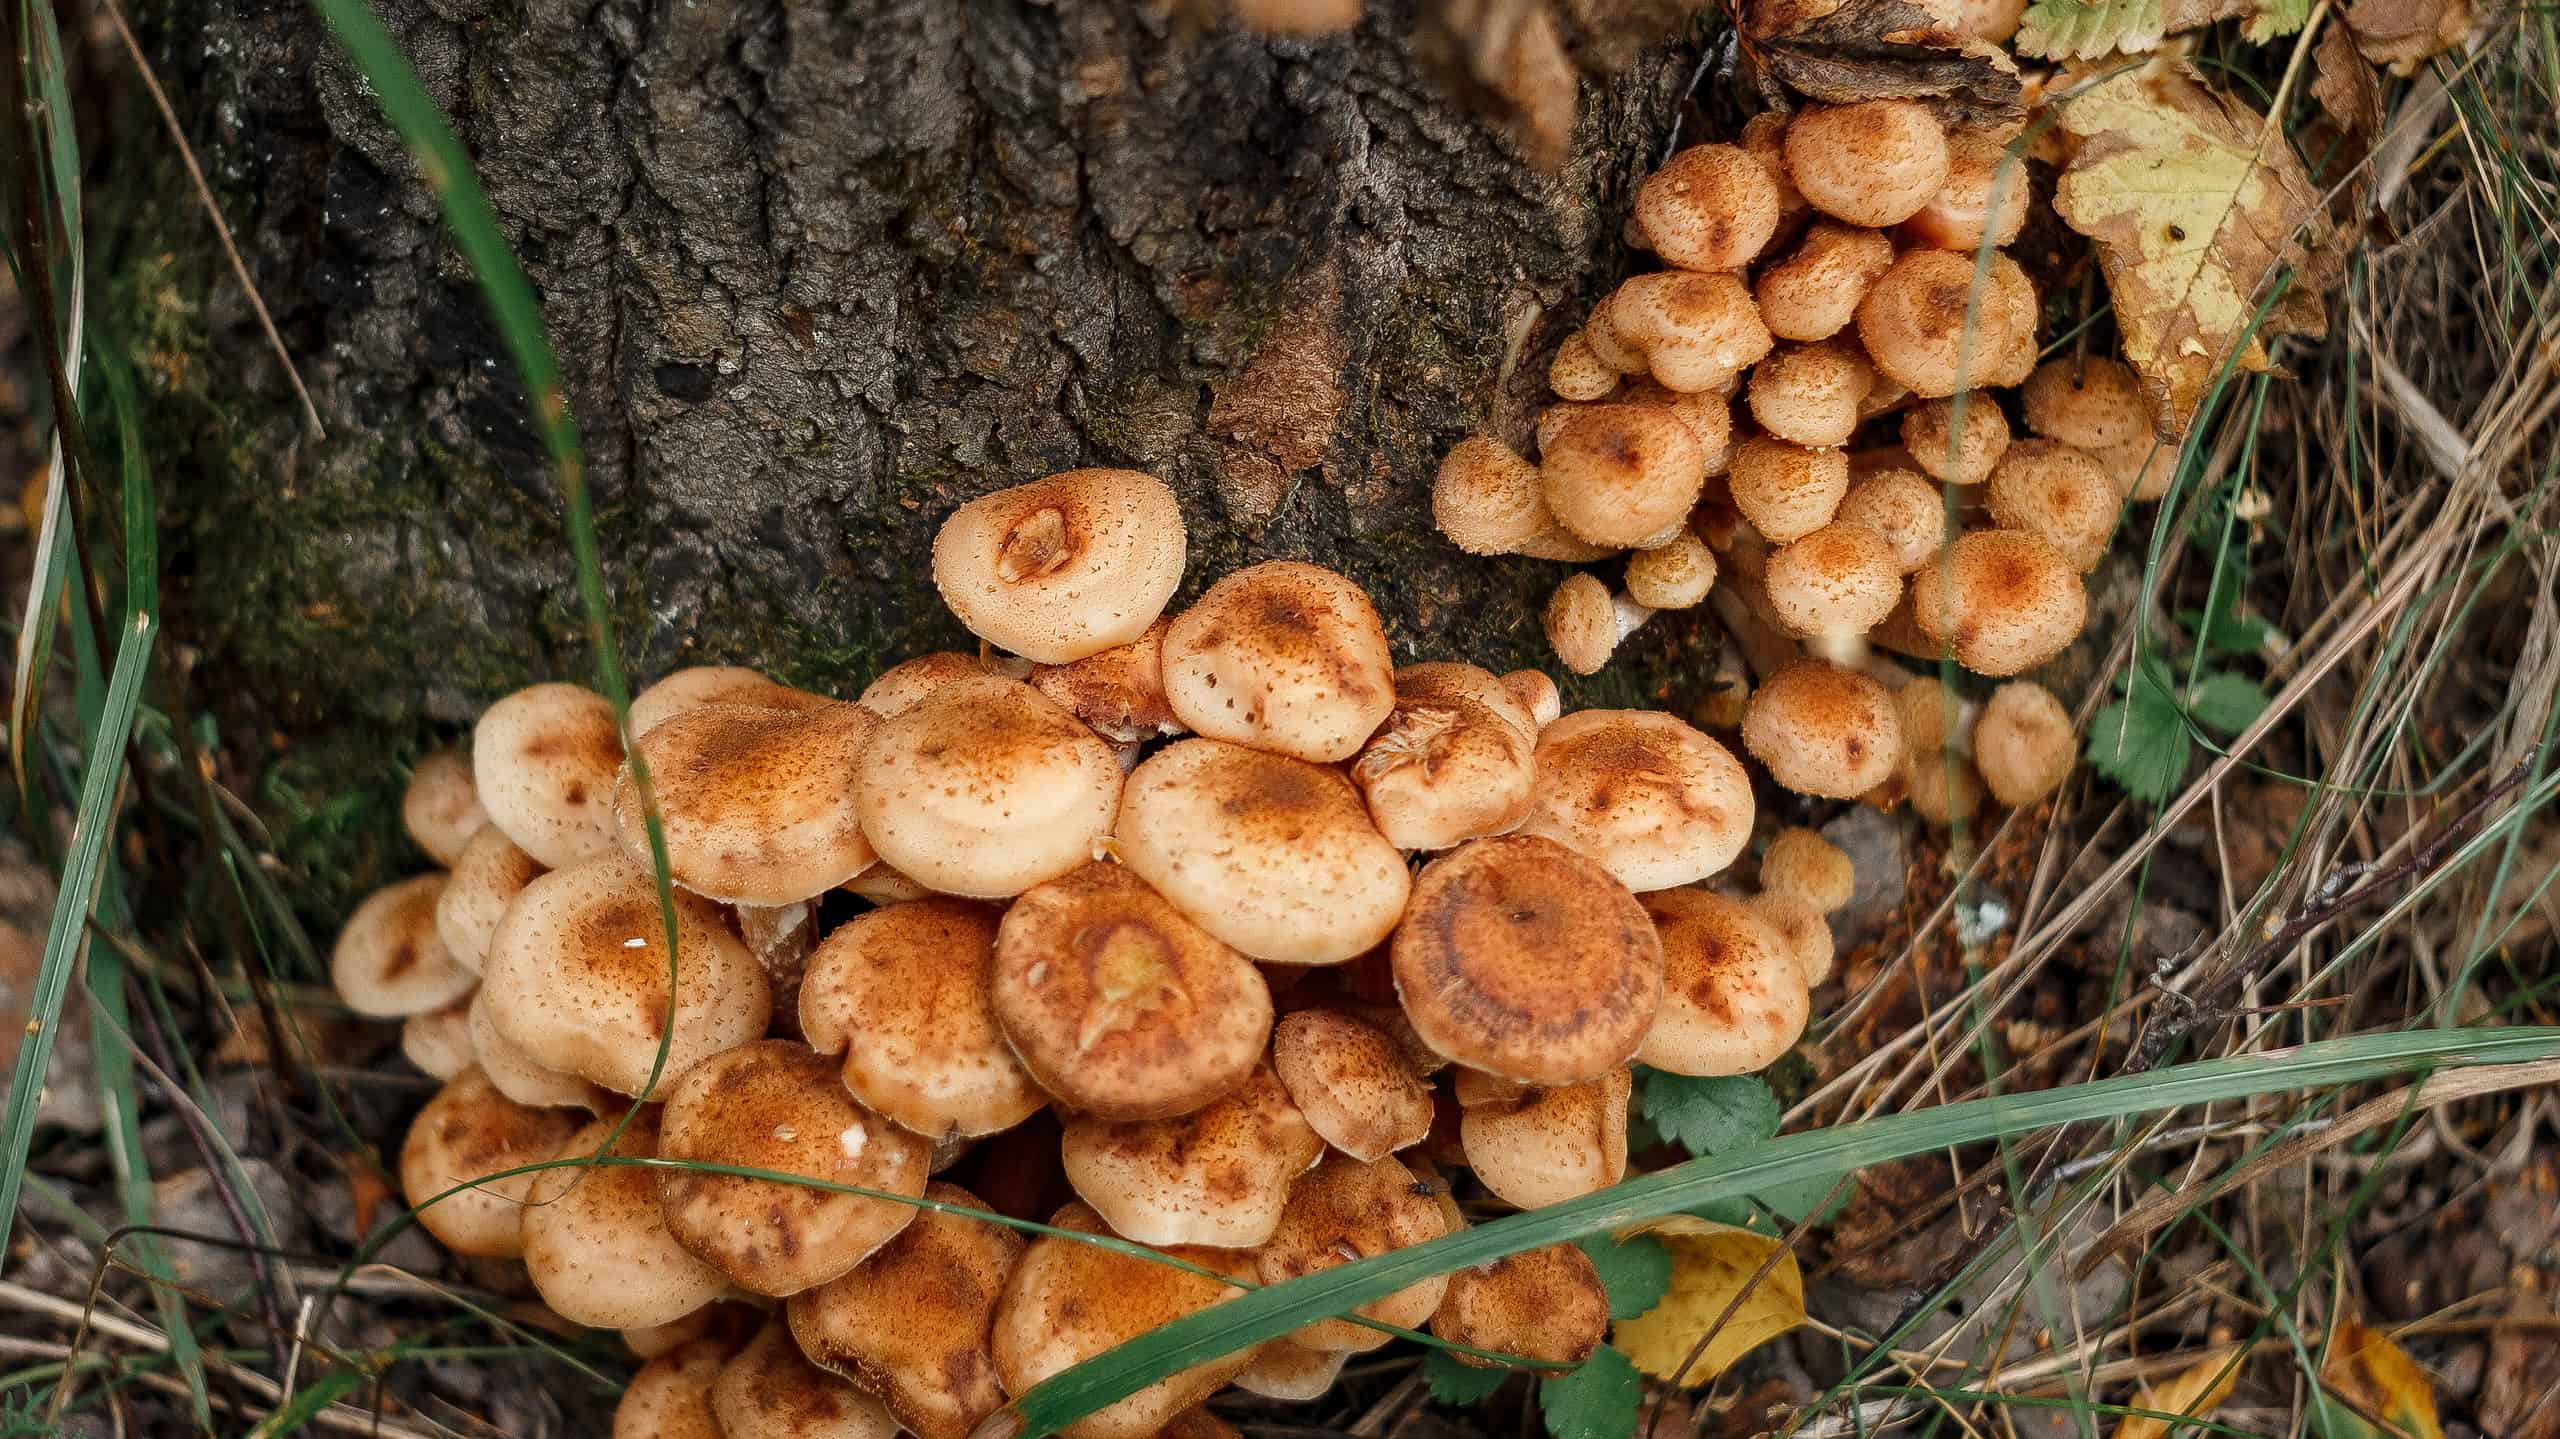 Armillaria mellea, commonly known as honey fungus, growing at the base of a tree